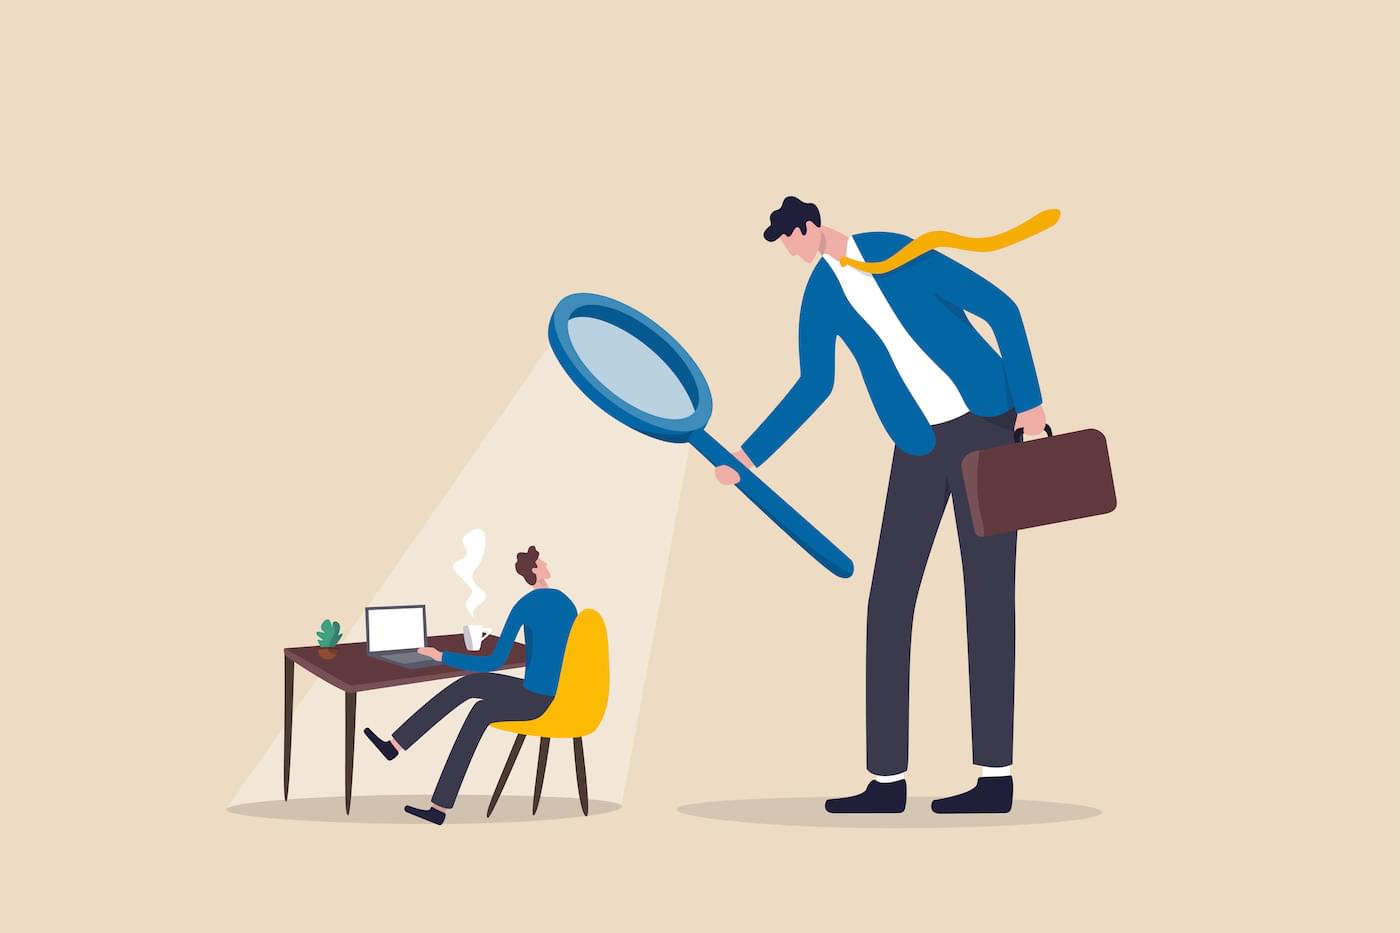 Illustration depicting an employee put under a magnifying glass. Represents employee monitoring.